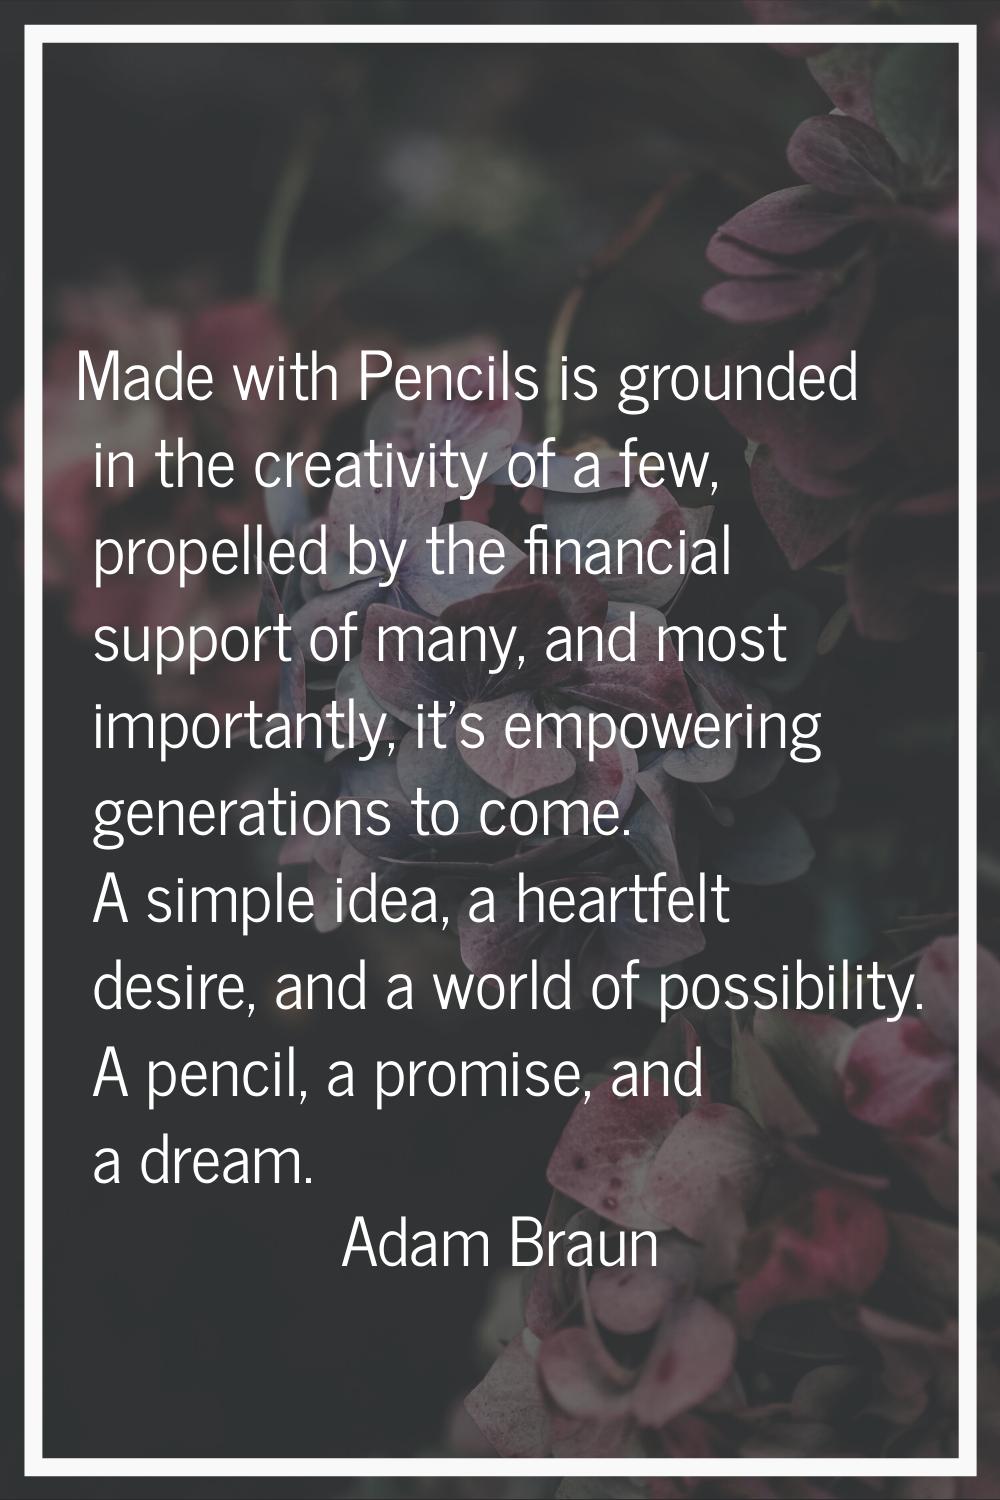 Made with Pencils is grounded in the creativity of a few, propelled by the financial support of man